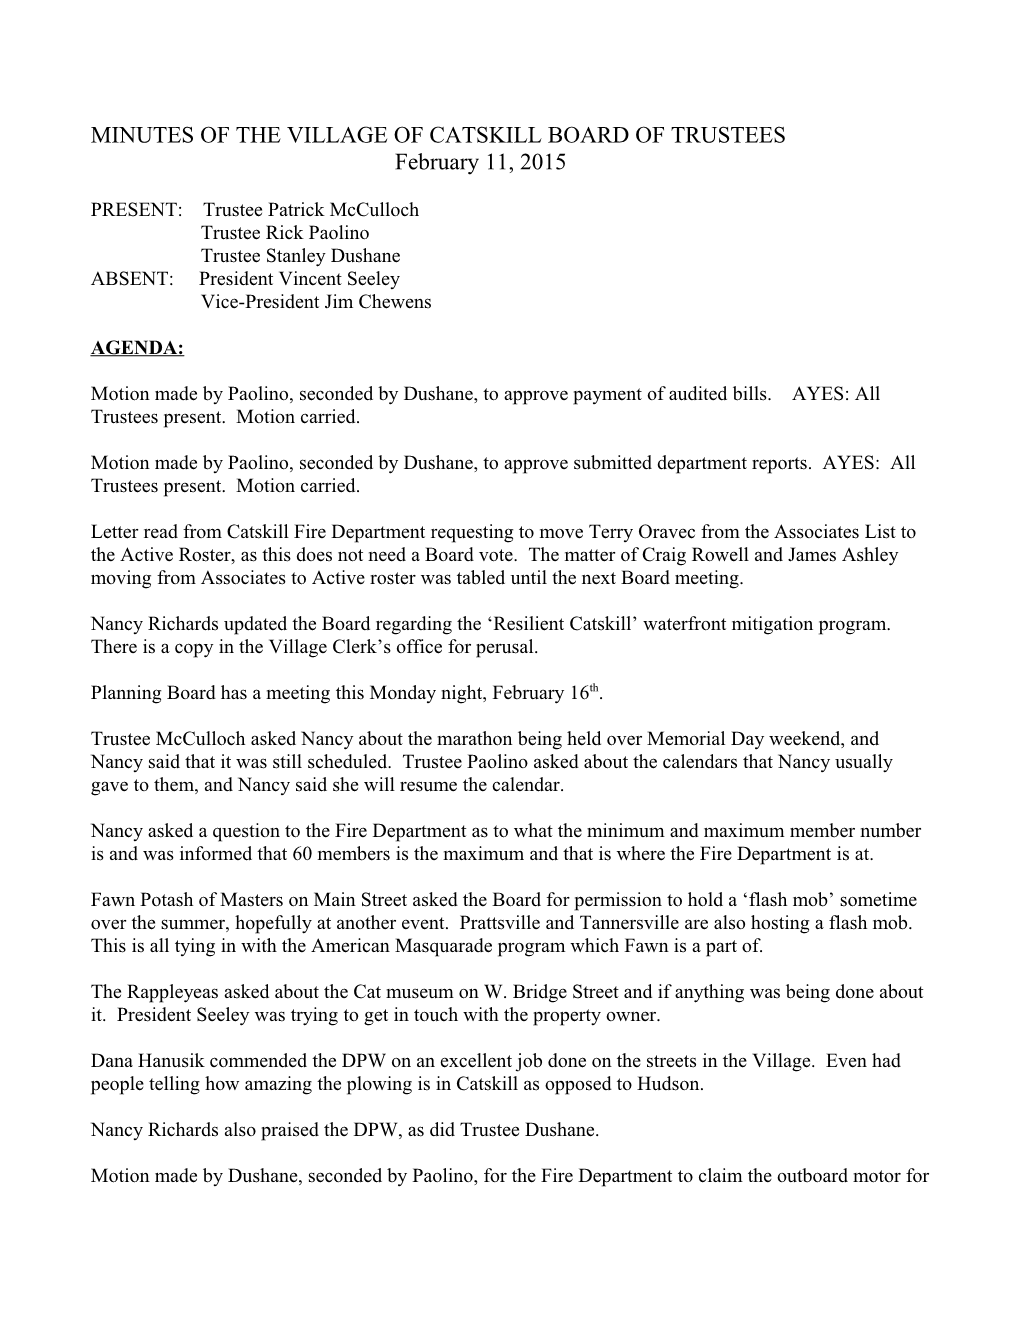 Minutes of the Village of Catskill Board of Trustees